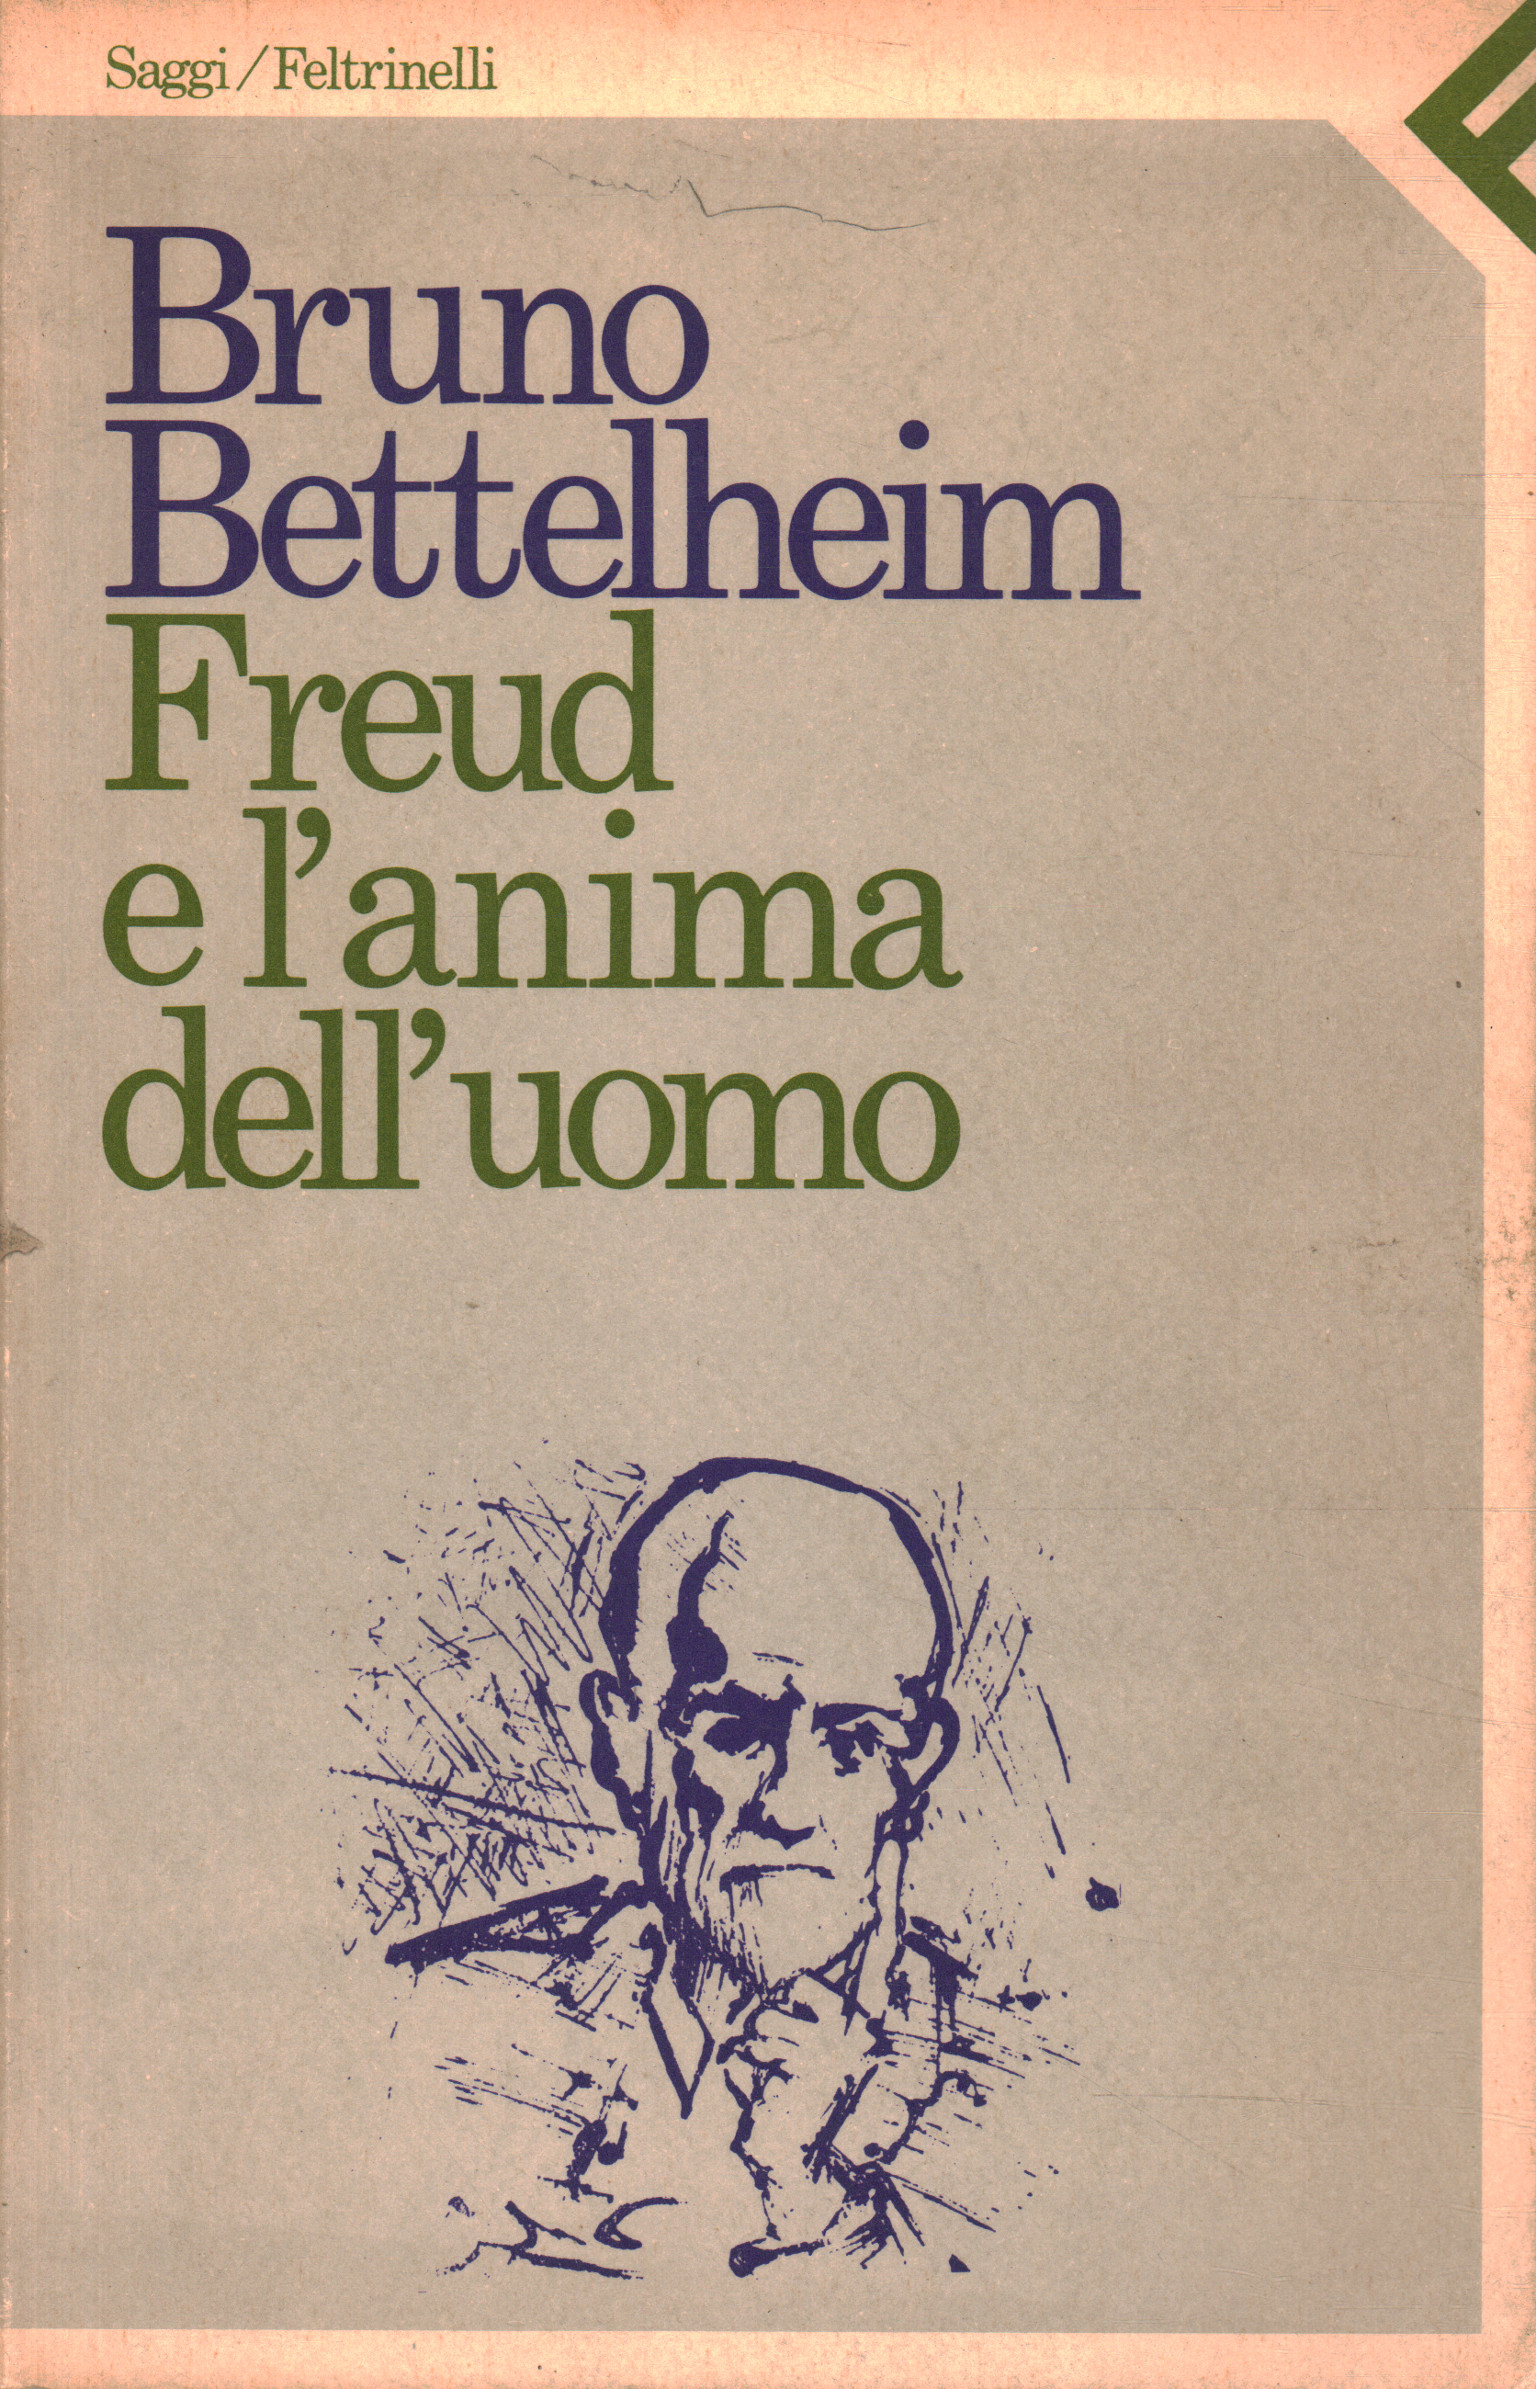 Freud and the soul of the u